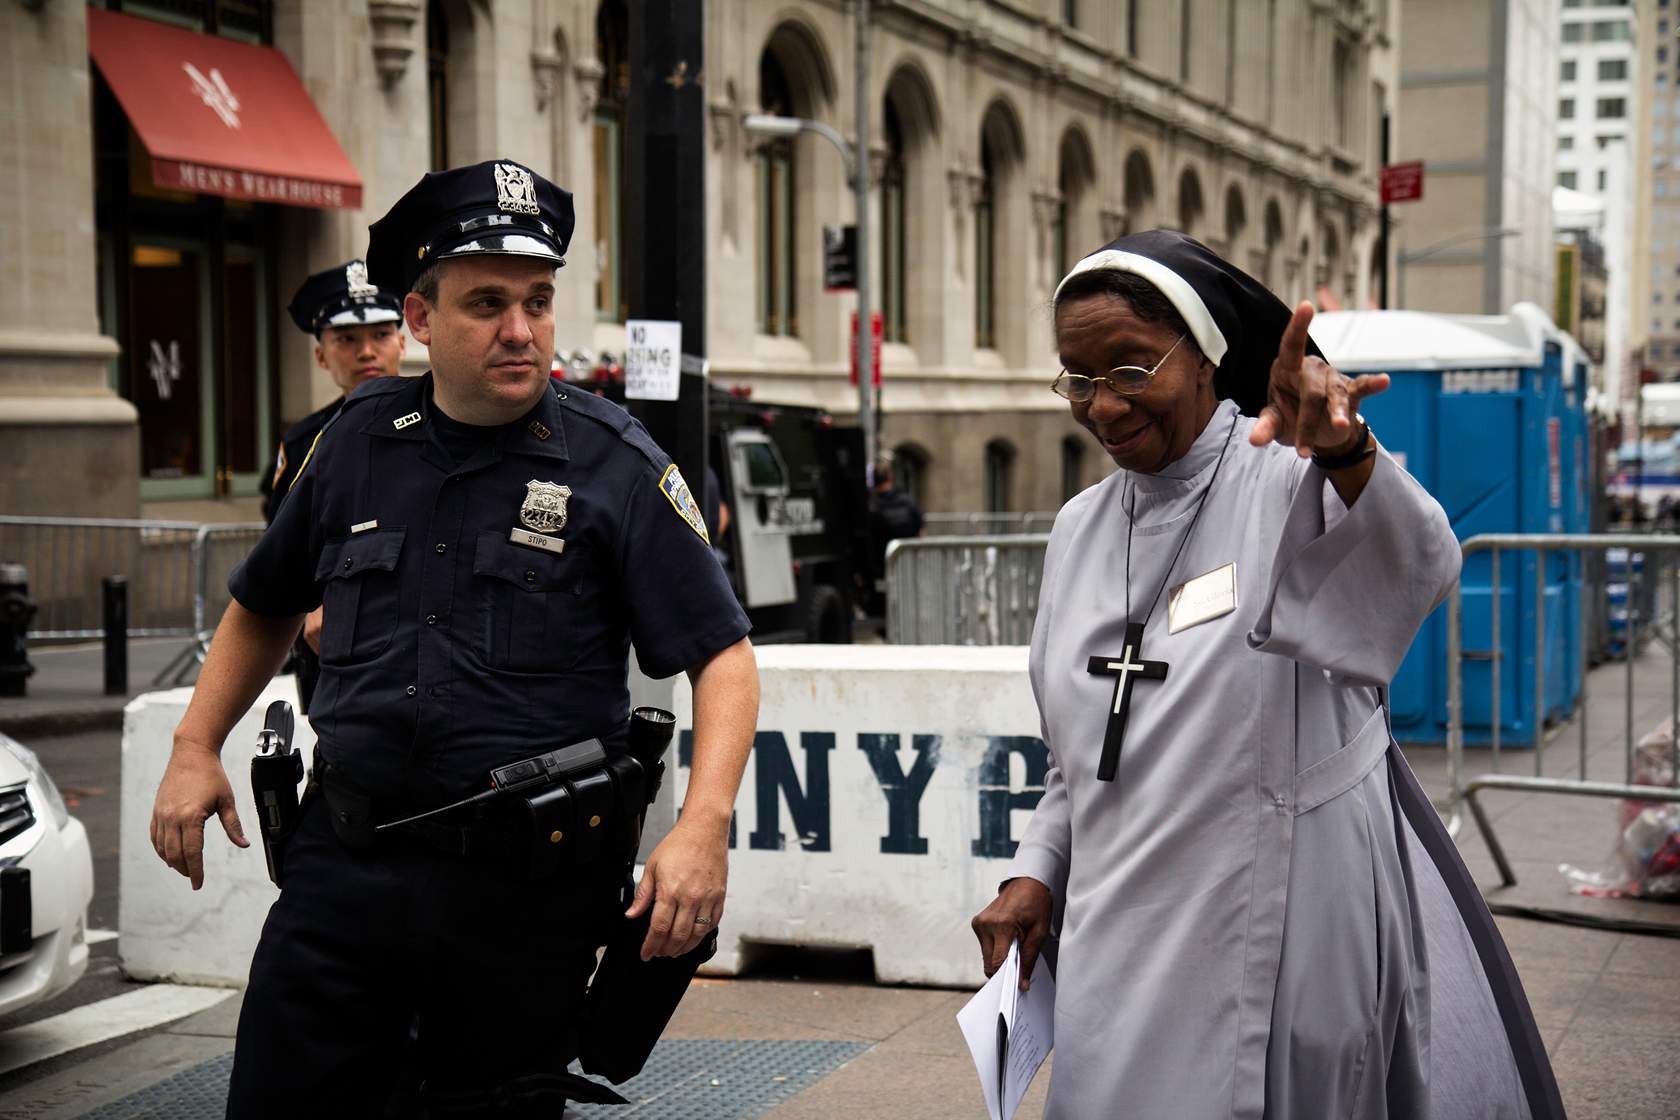 A police officer standing with a nun in a habit during audience control.